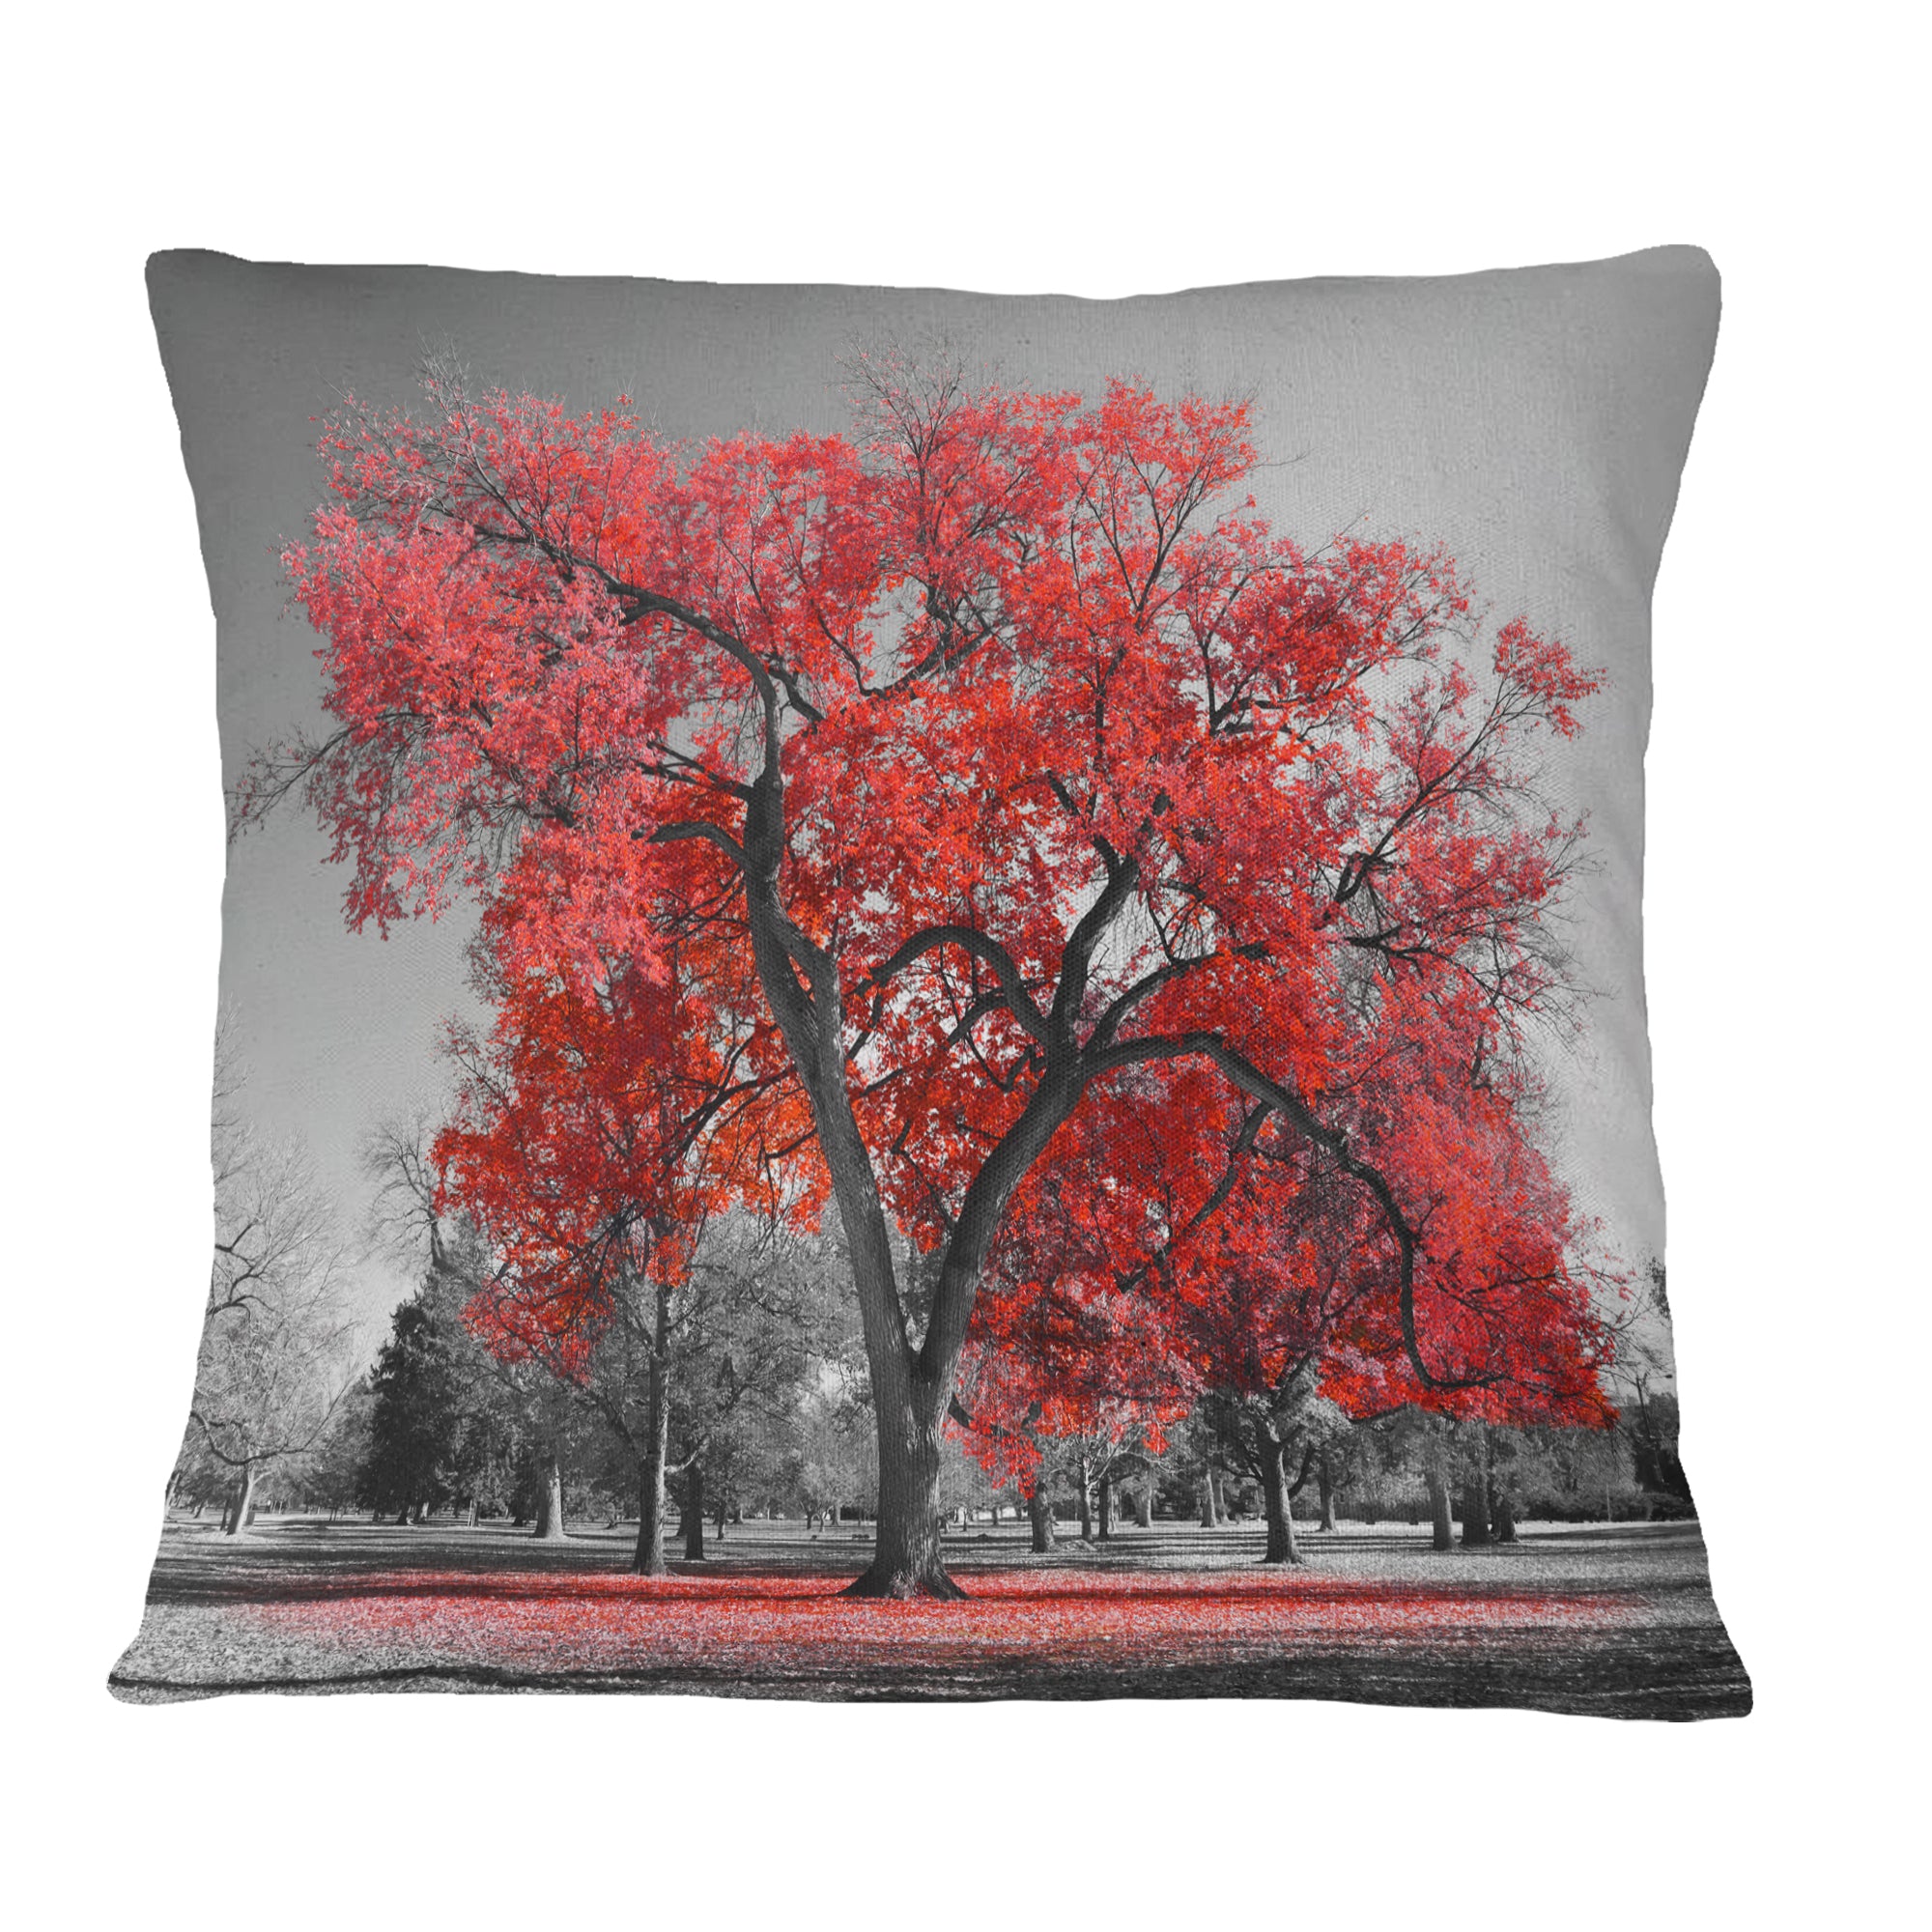 Big Red Tree on Foggy Day - Landscape Printed Throw Pillow